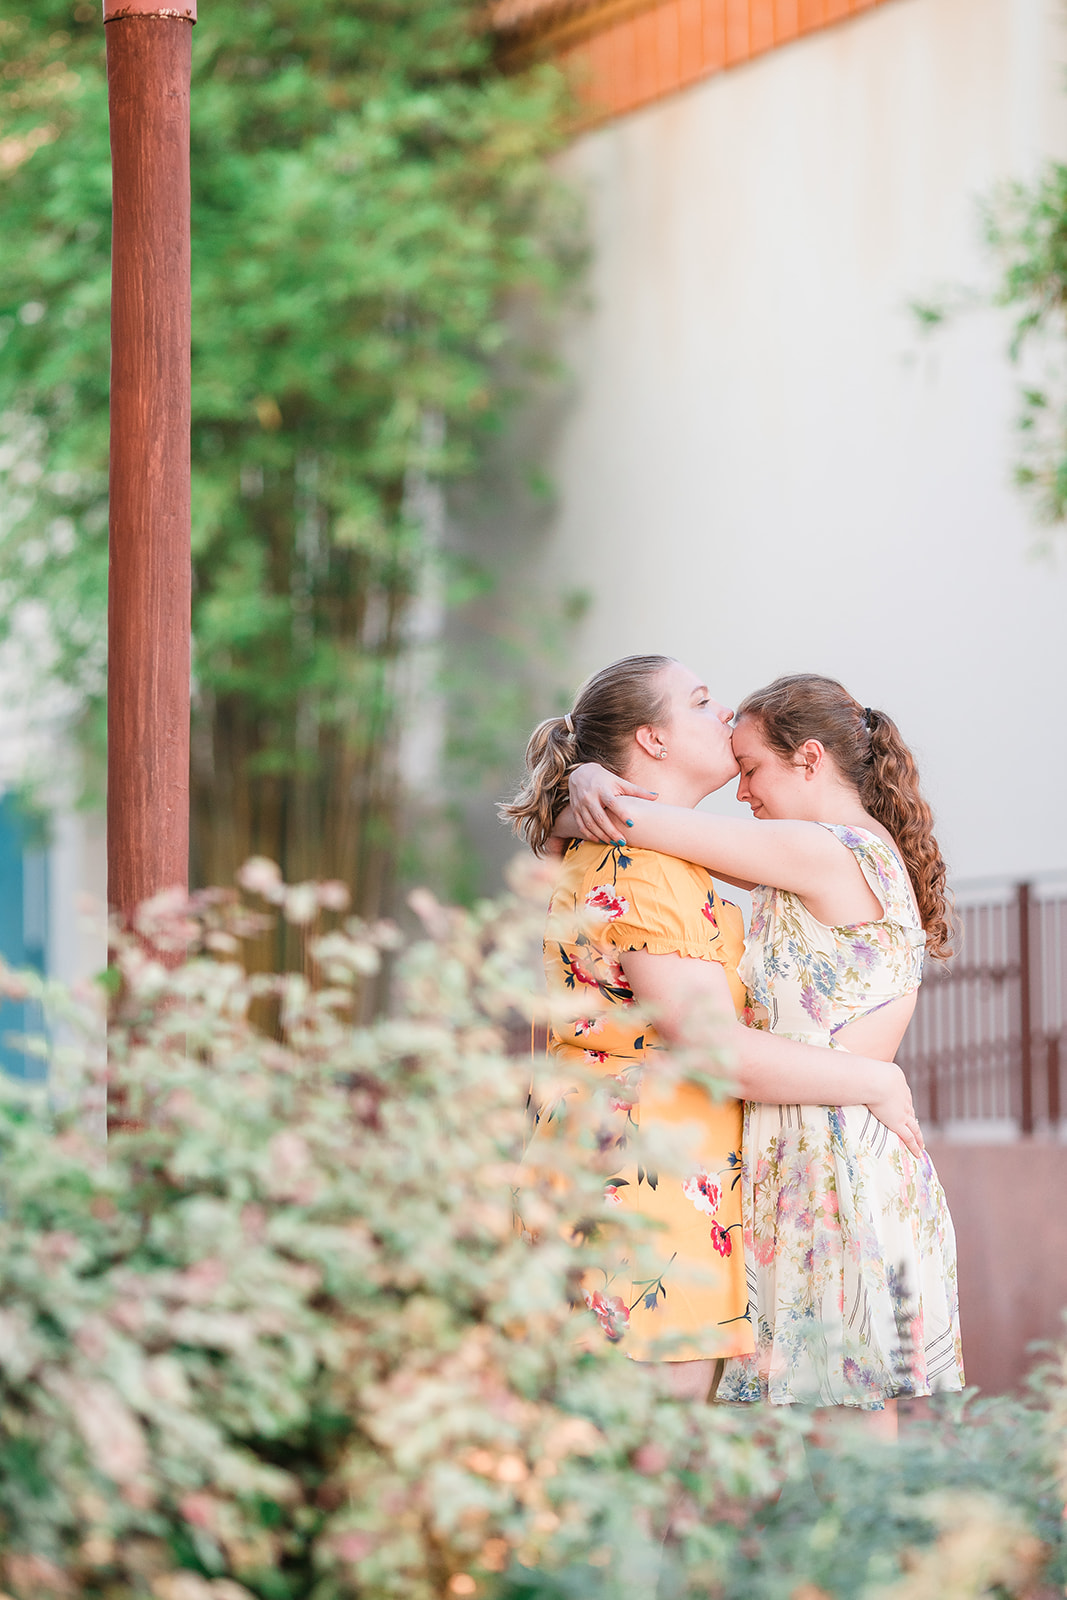 Two brides embrace in a serene and tranquil setting, surrounded by peace and love.